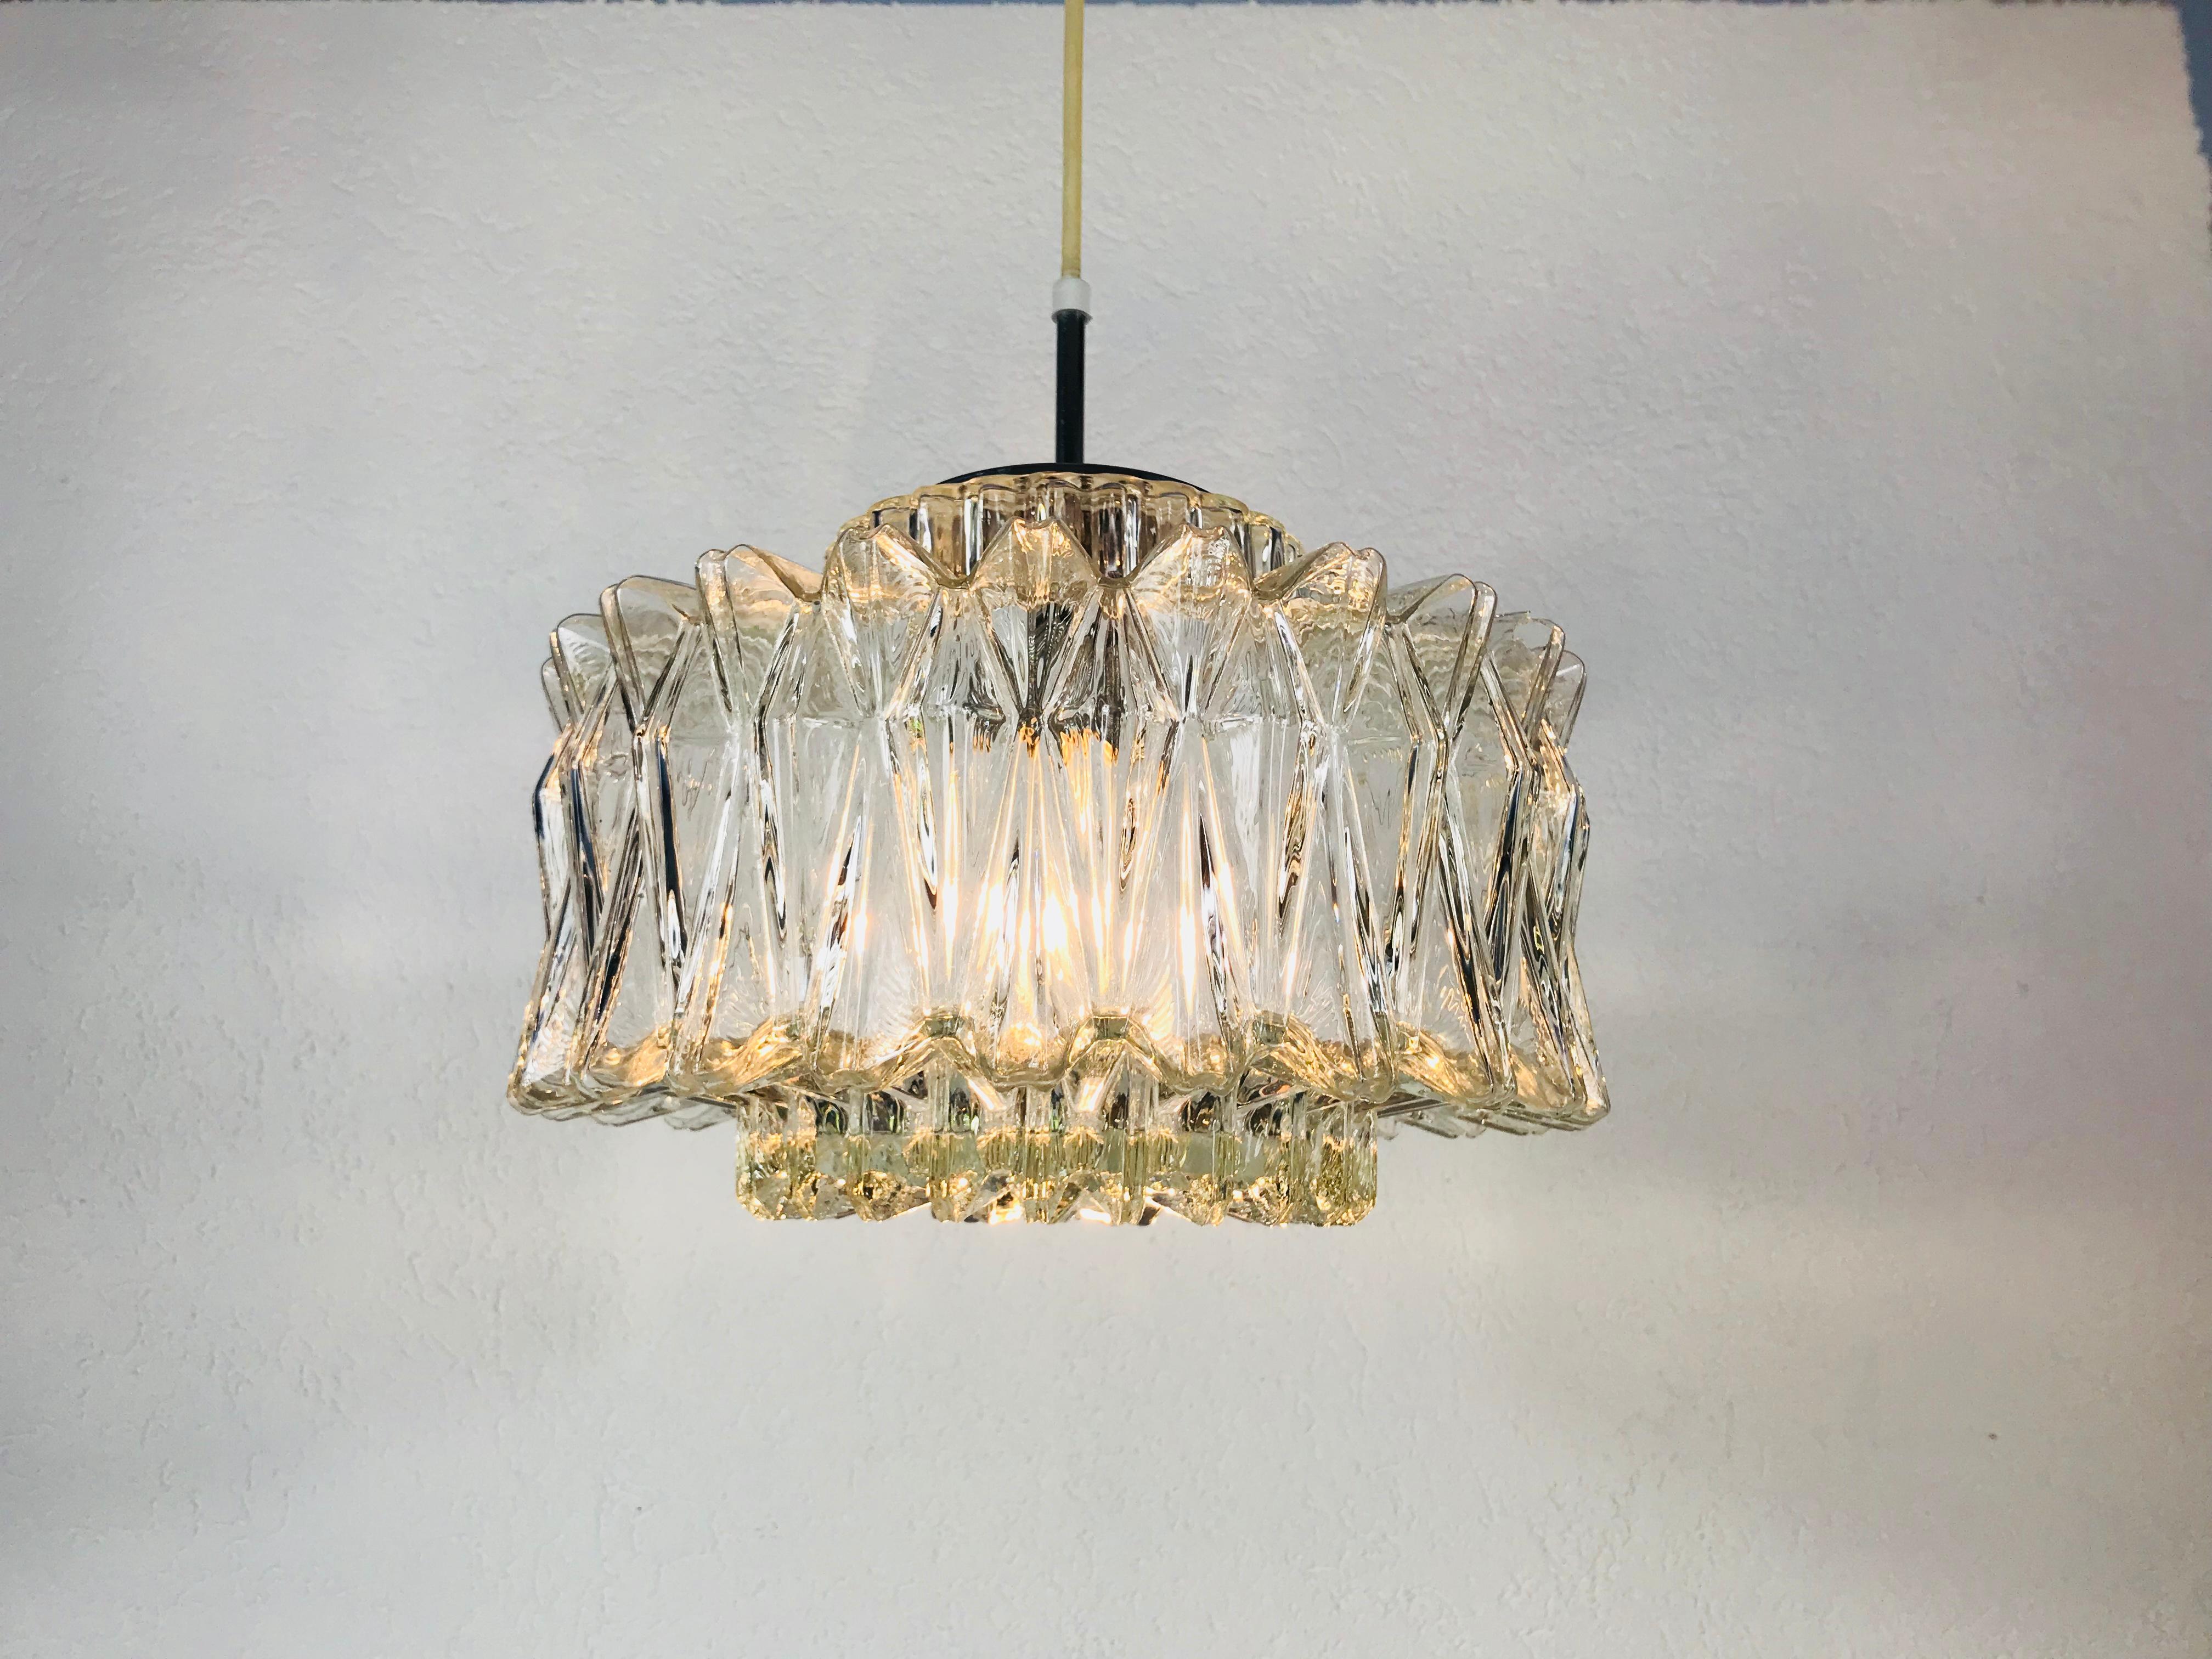 A Mid-Century Modern chandelier by Glashütte Limburg made in the 1960s in Germany. It is fascinating with its beautiful diamond shape. 3-tier structured glass with chrome aluminum top.

The light requires one E27 light bulb.